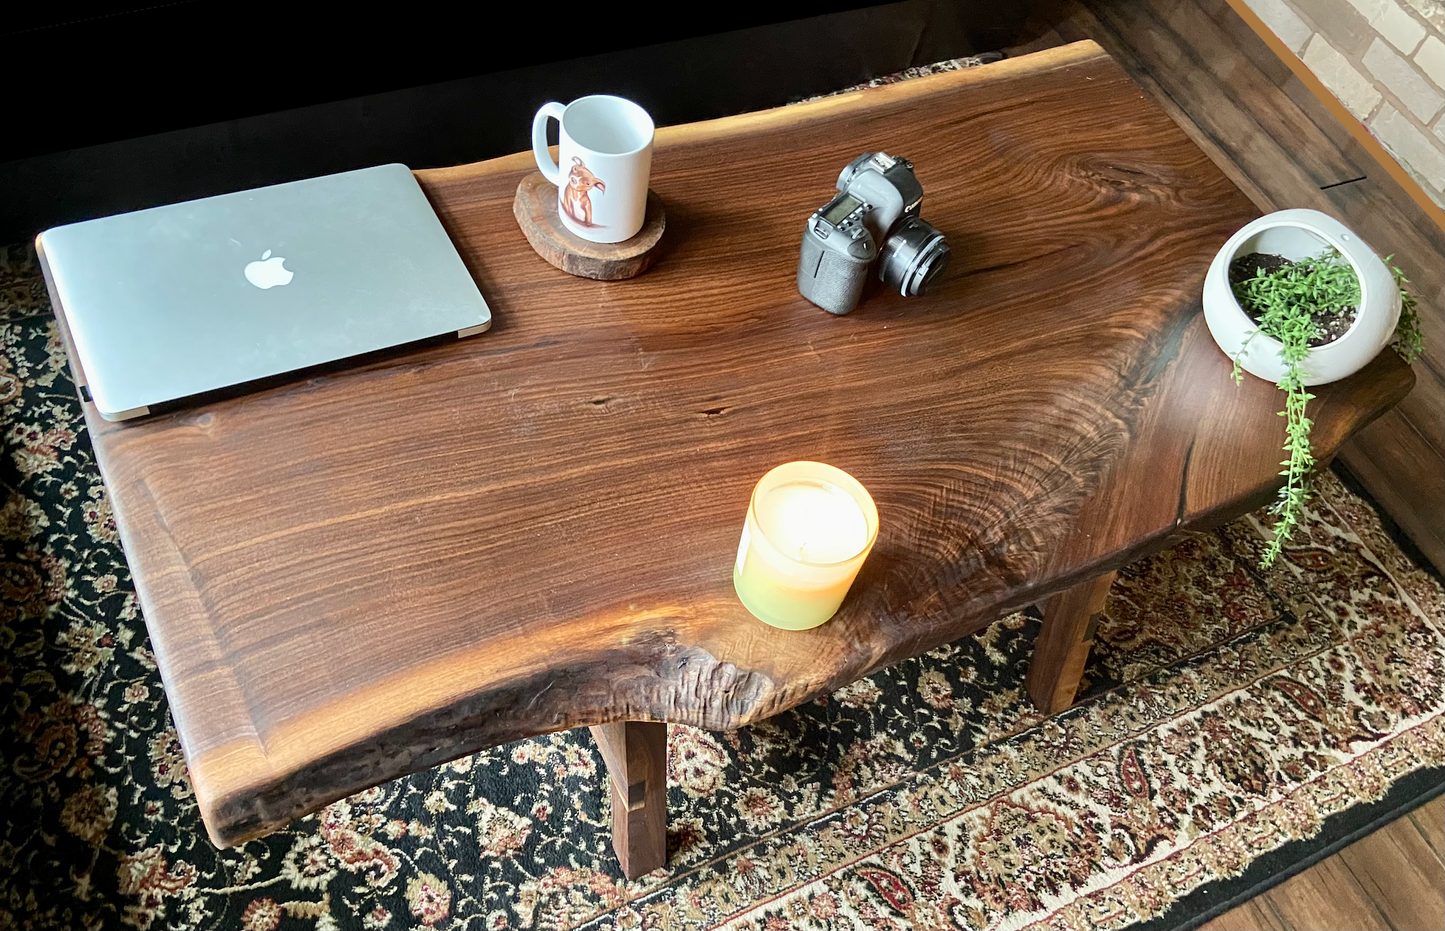 Wider Natural Live Edge Walnut Coffee Table with Stunning Fiddleback and Feathered Grain Patterns